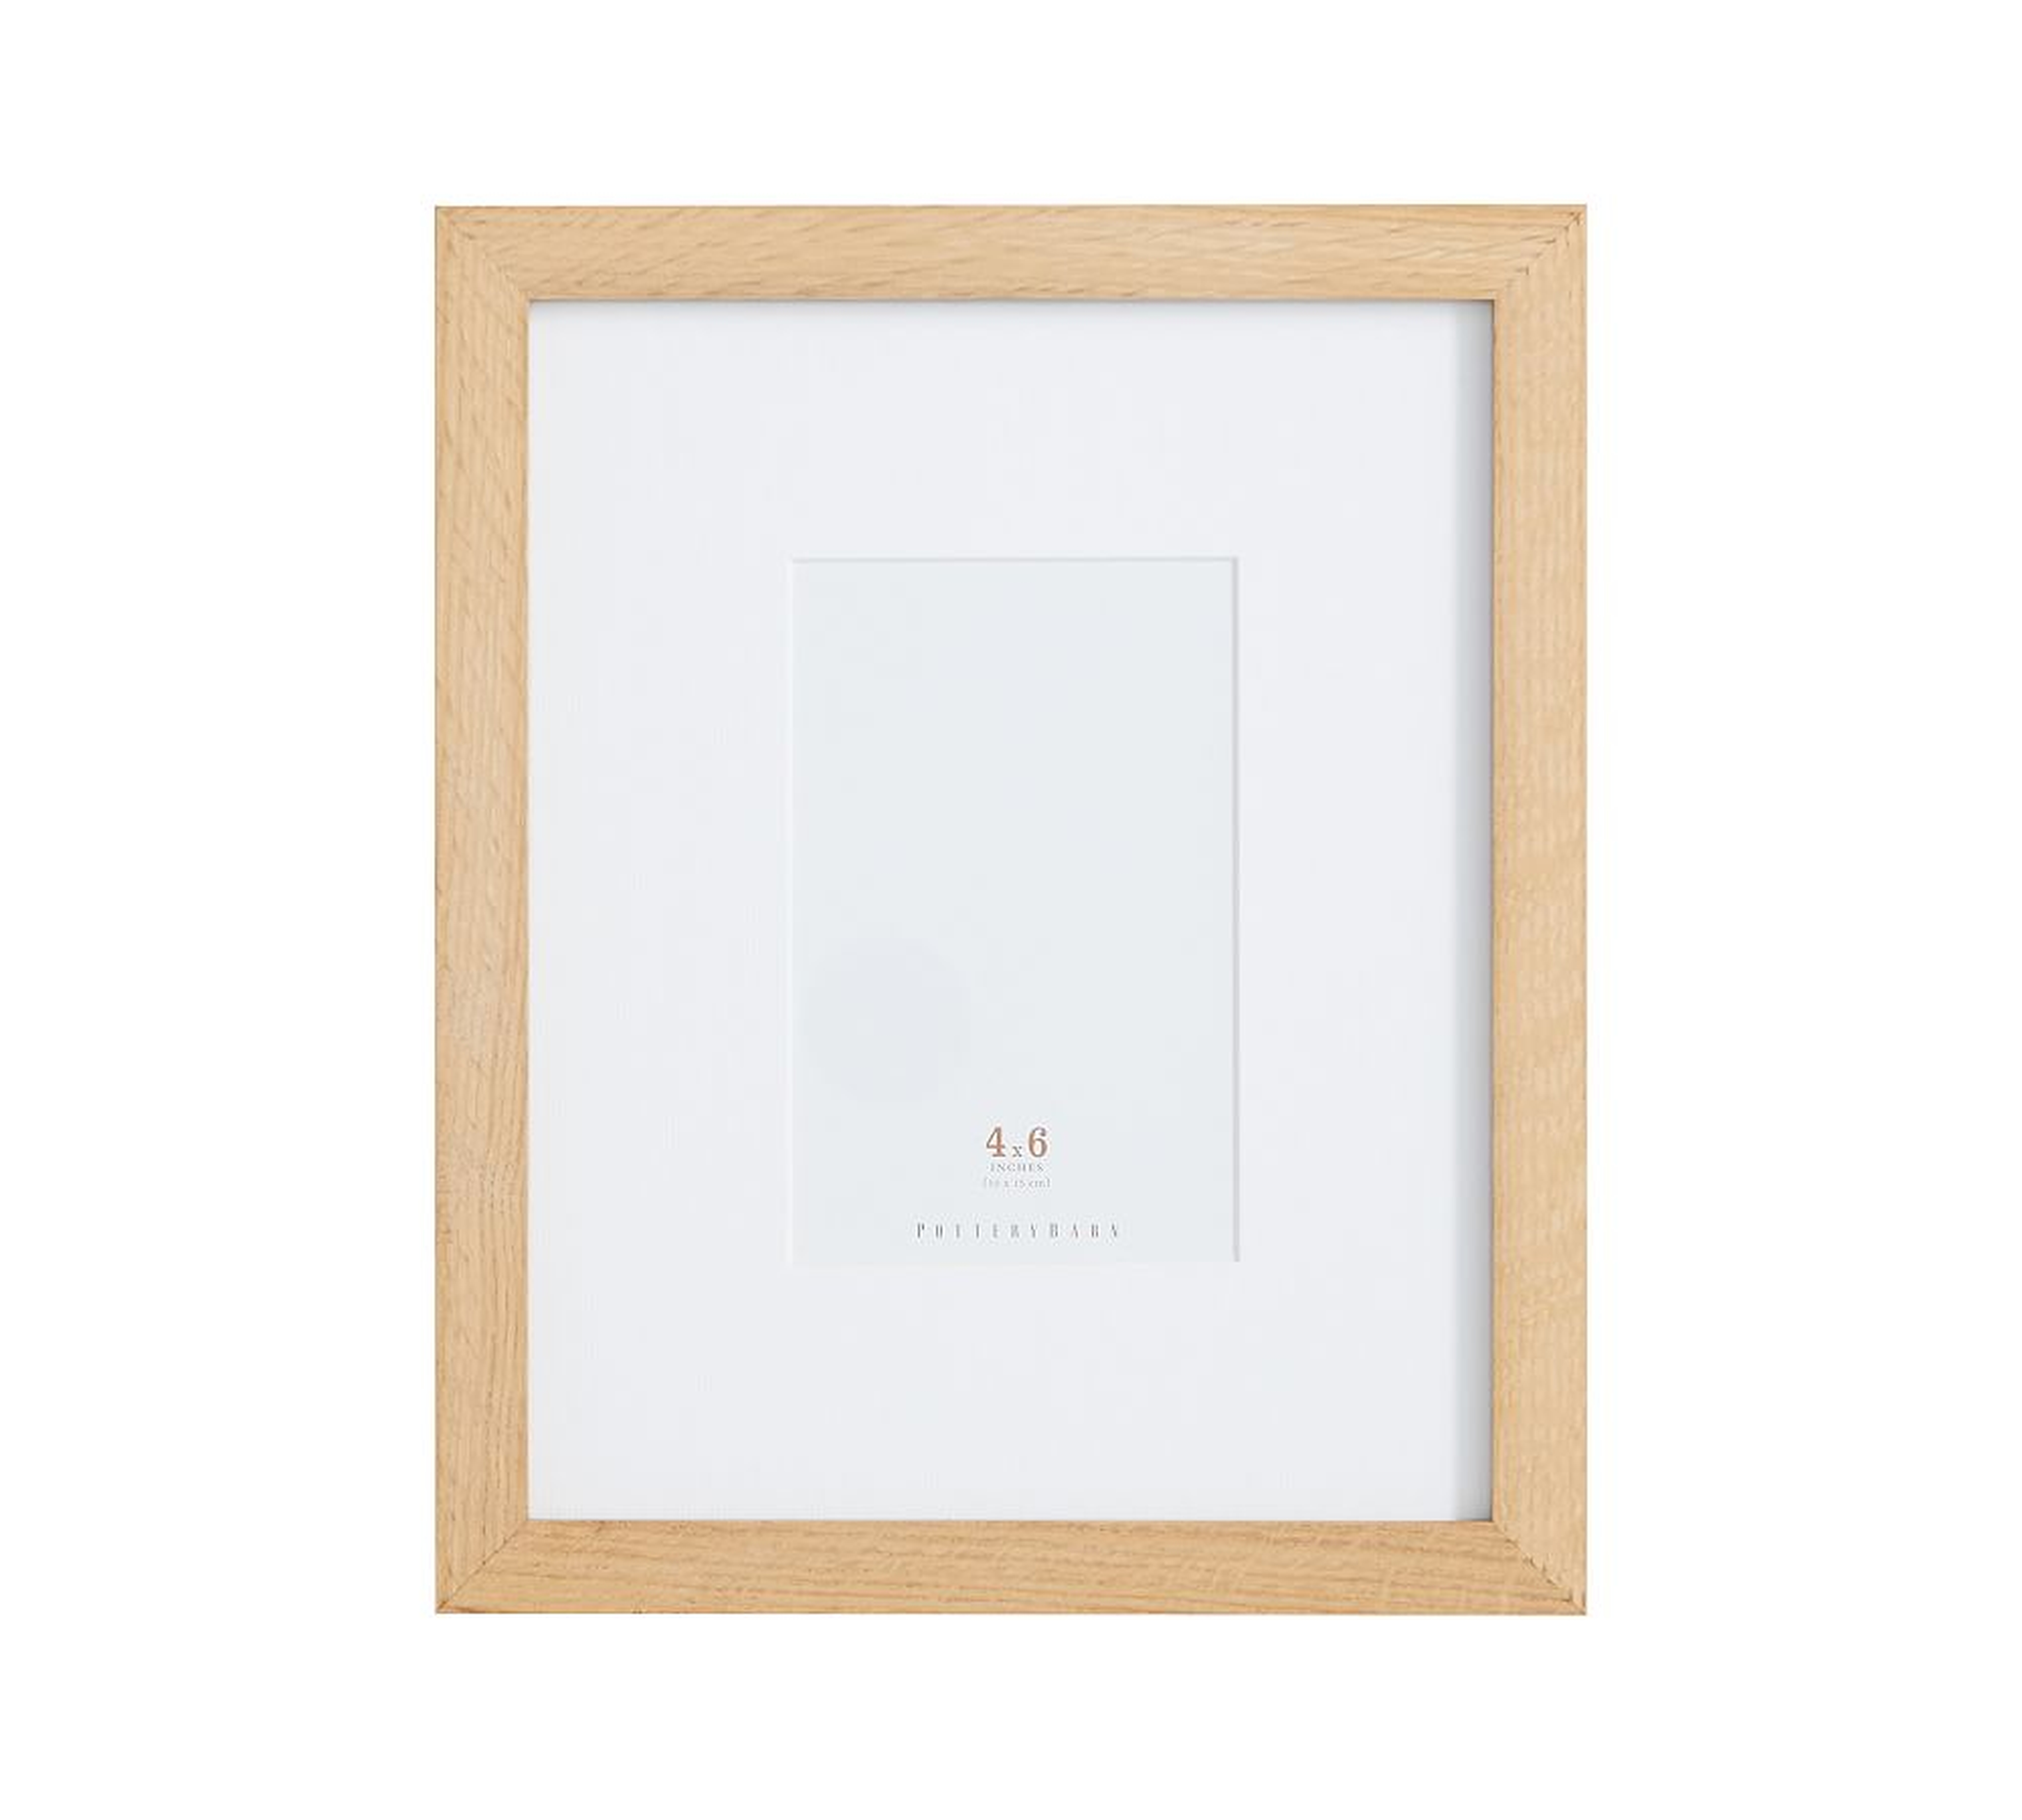 Wood Gallery Single Opening Frame, 4" x 6", Natural - Pottery Barn